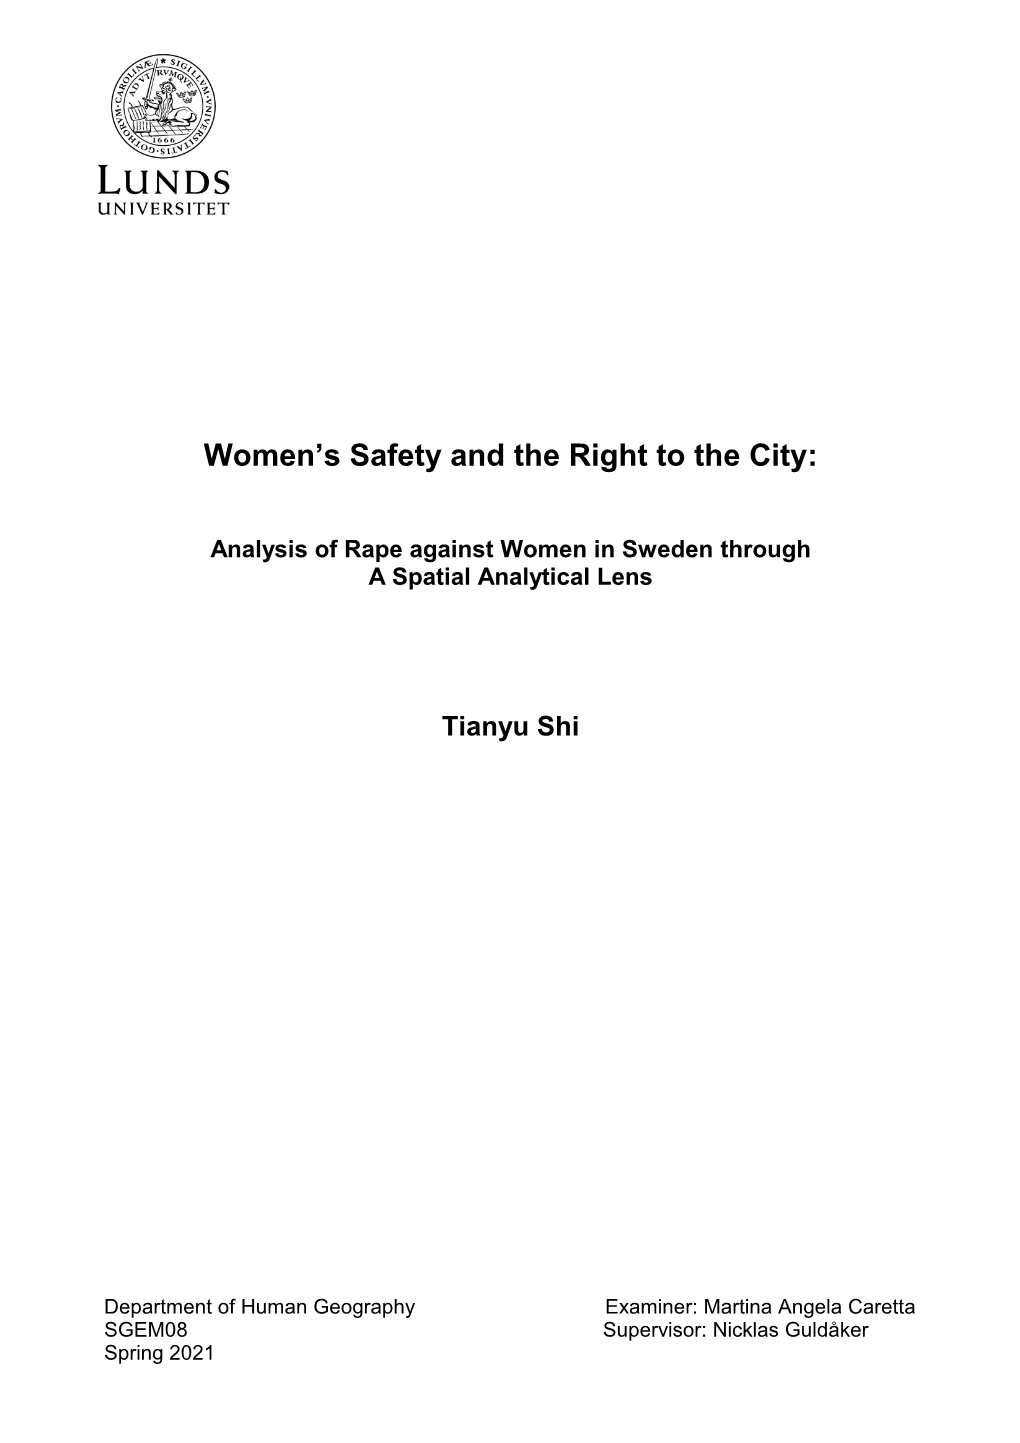 Women's Safety and the Right to the City